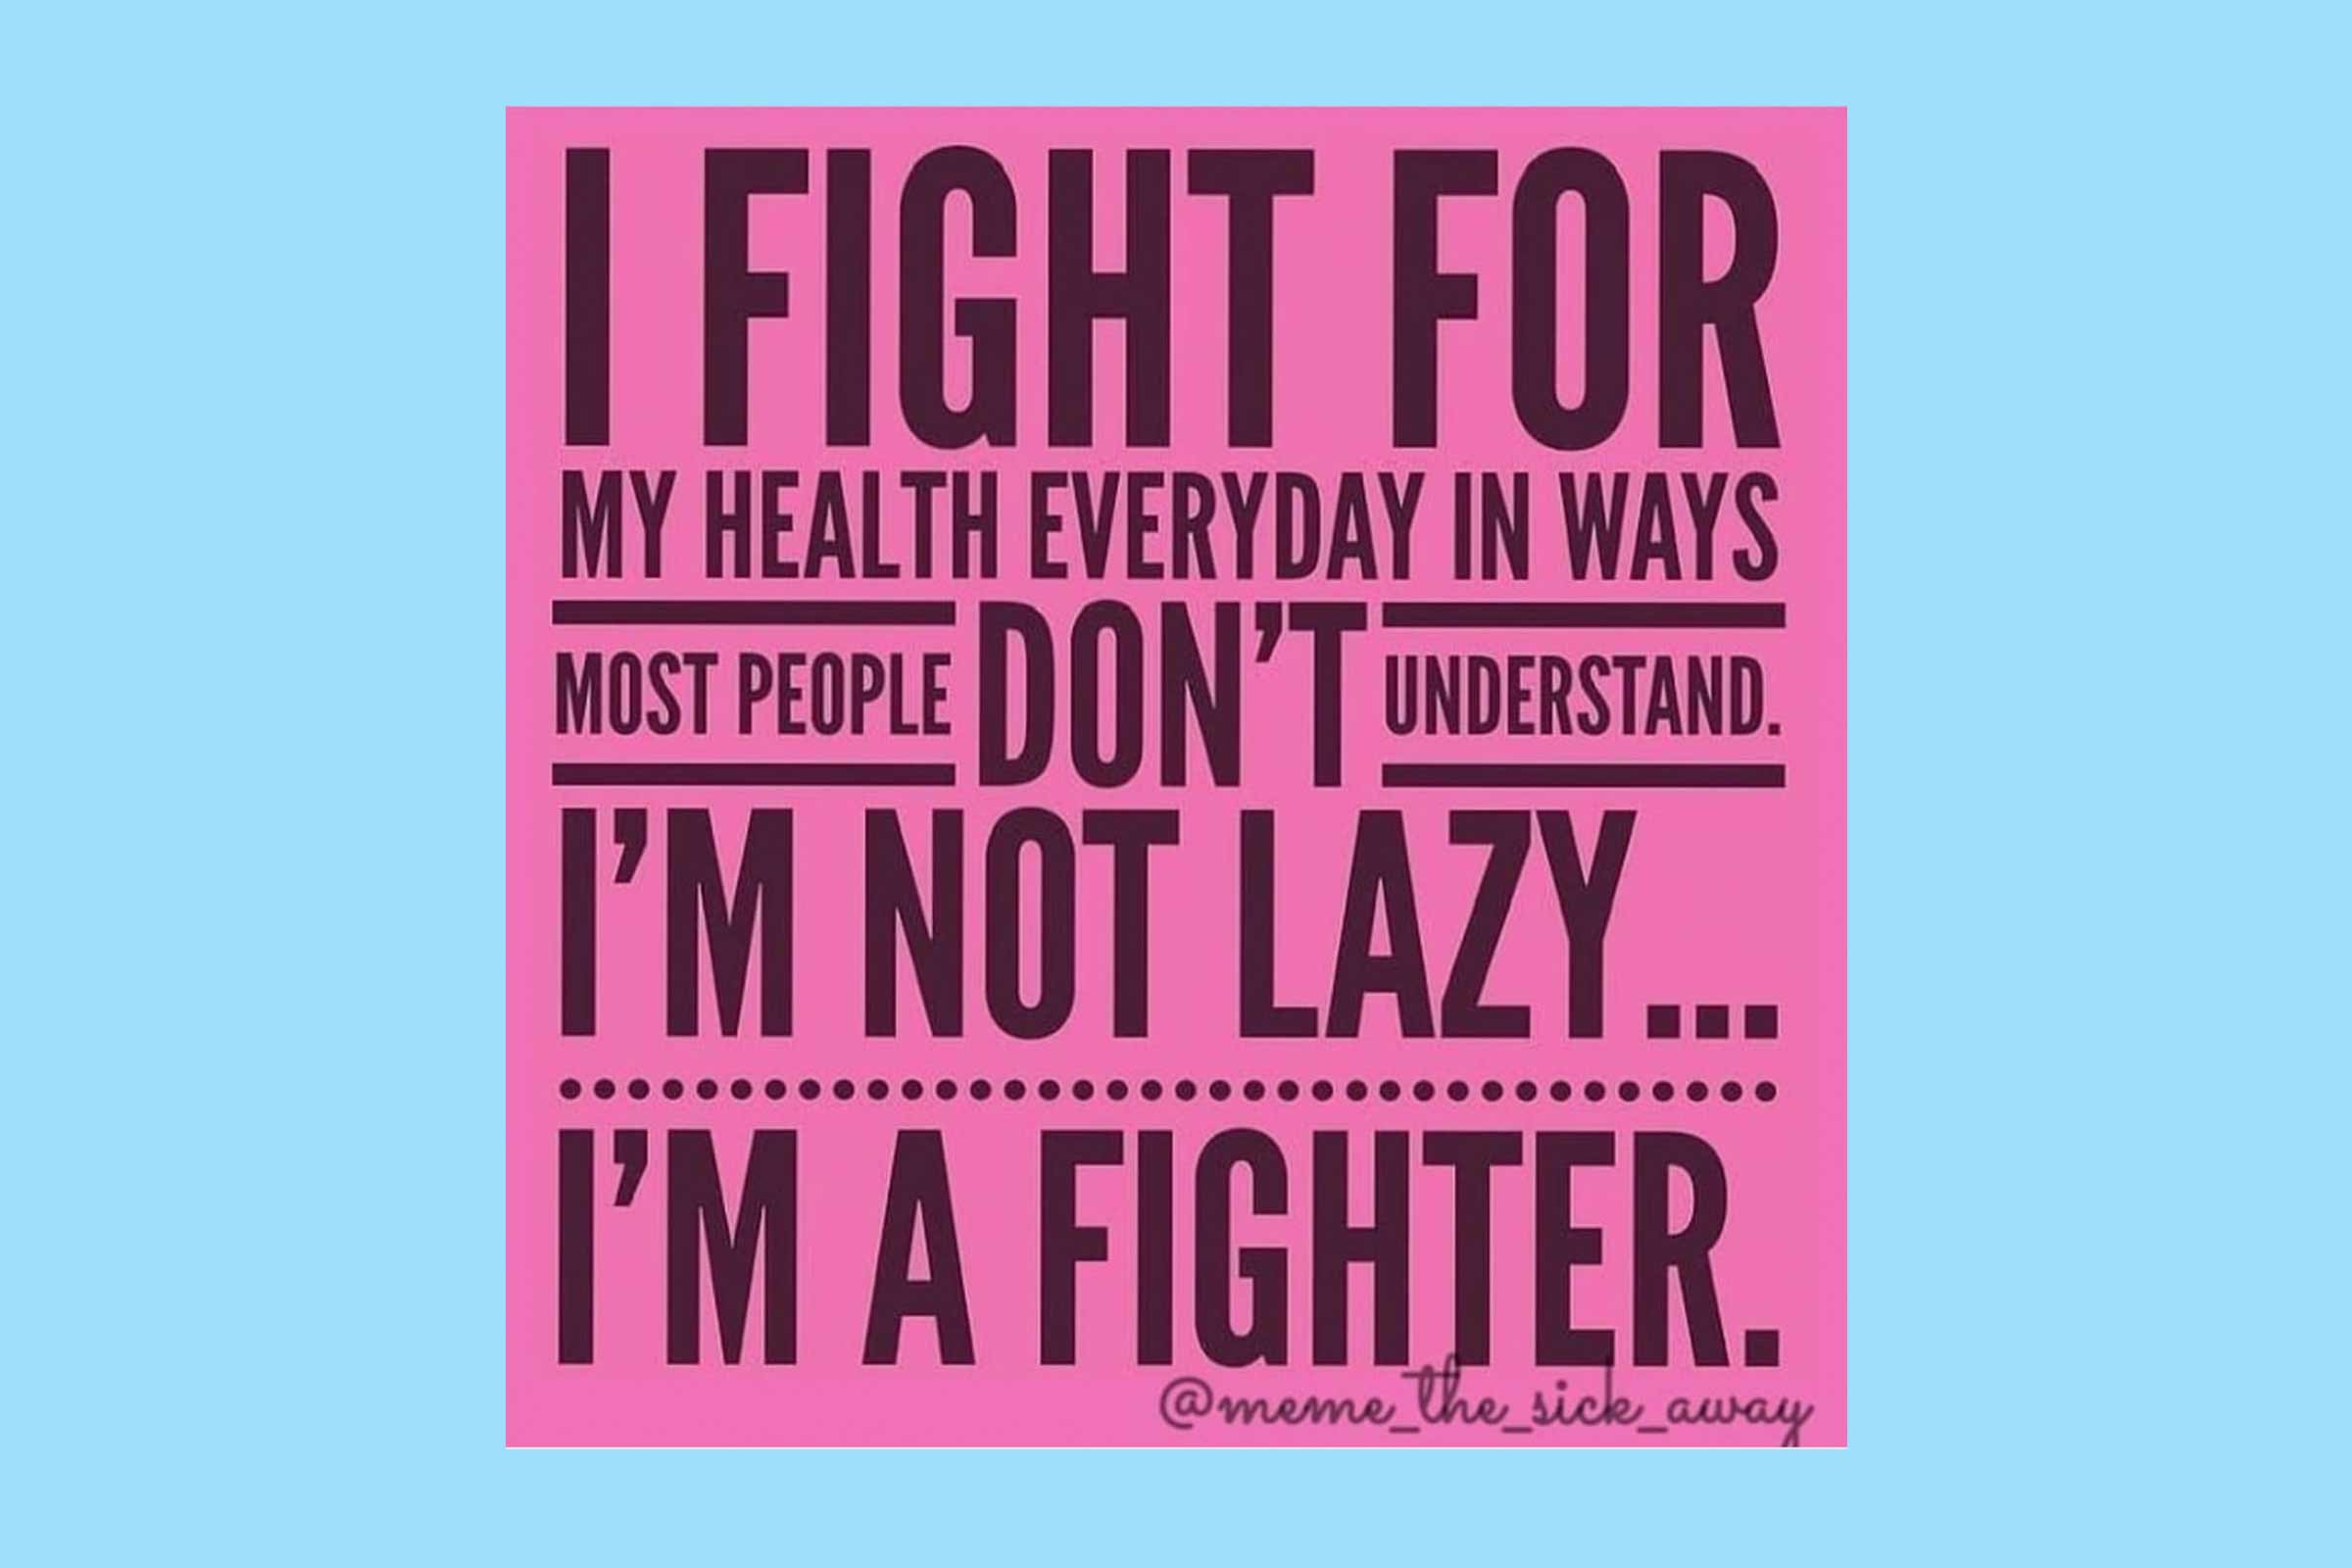 Inspiring Memes And Sayings For People With Chronic Illness